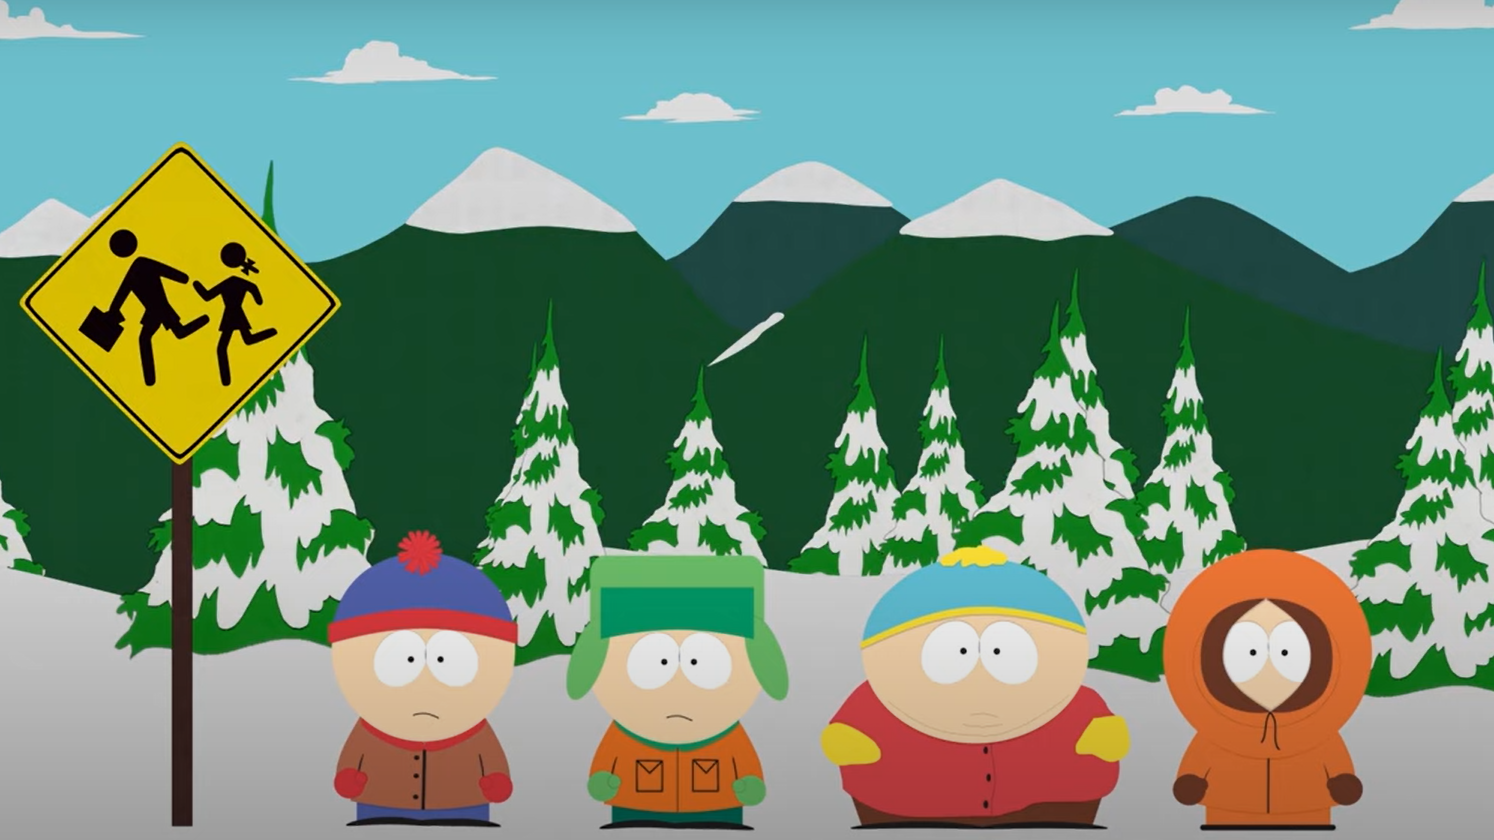 South Park - Season 26, Ep. 2 - The Worldwide Privacy Tour - Full Episode